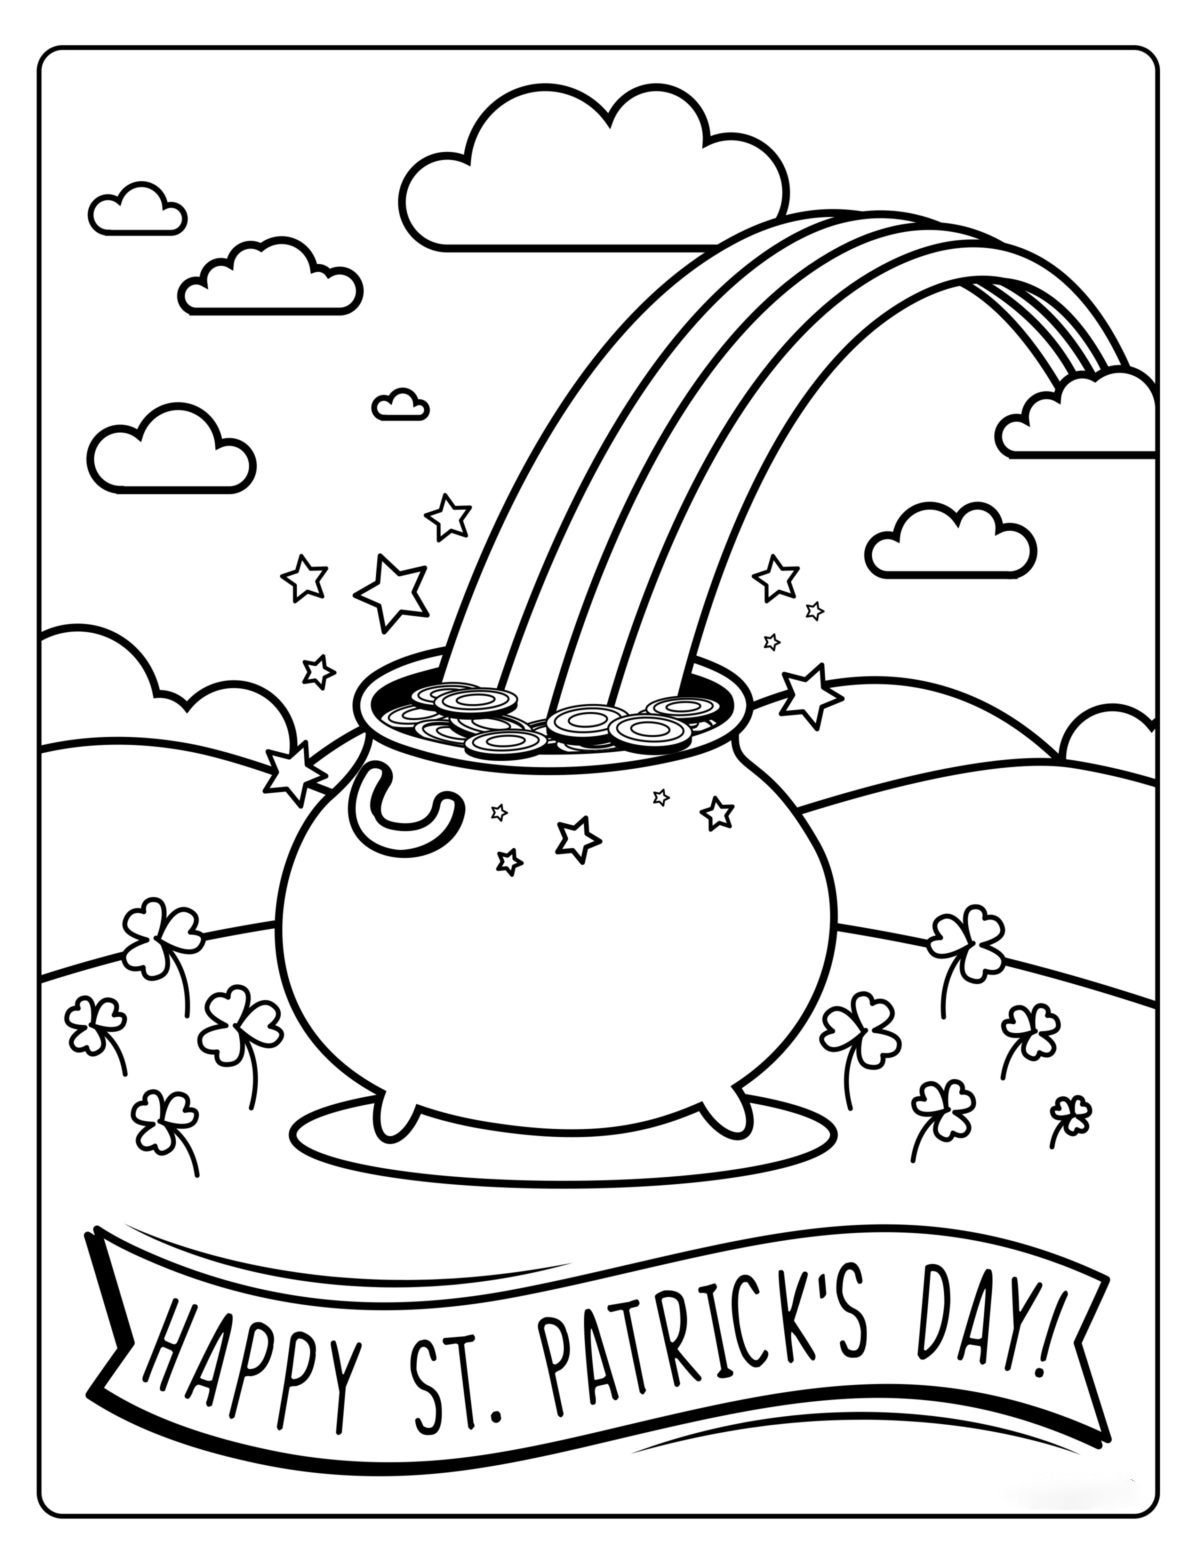 Rainbow St.Patricks day Coloring Page